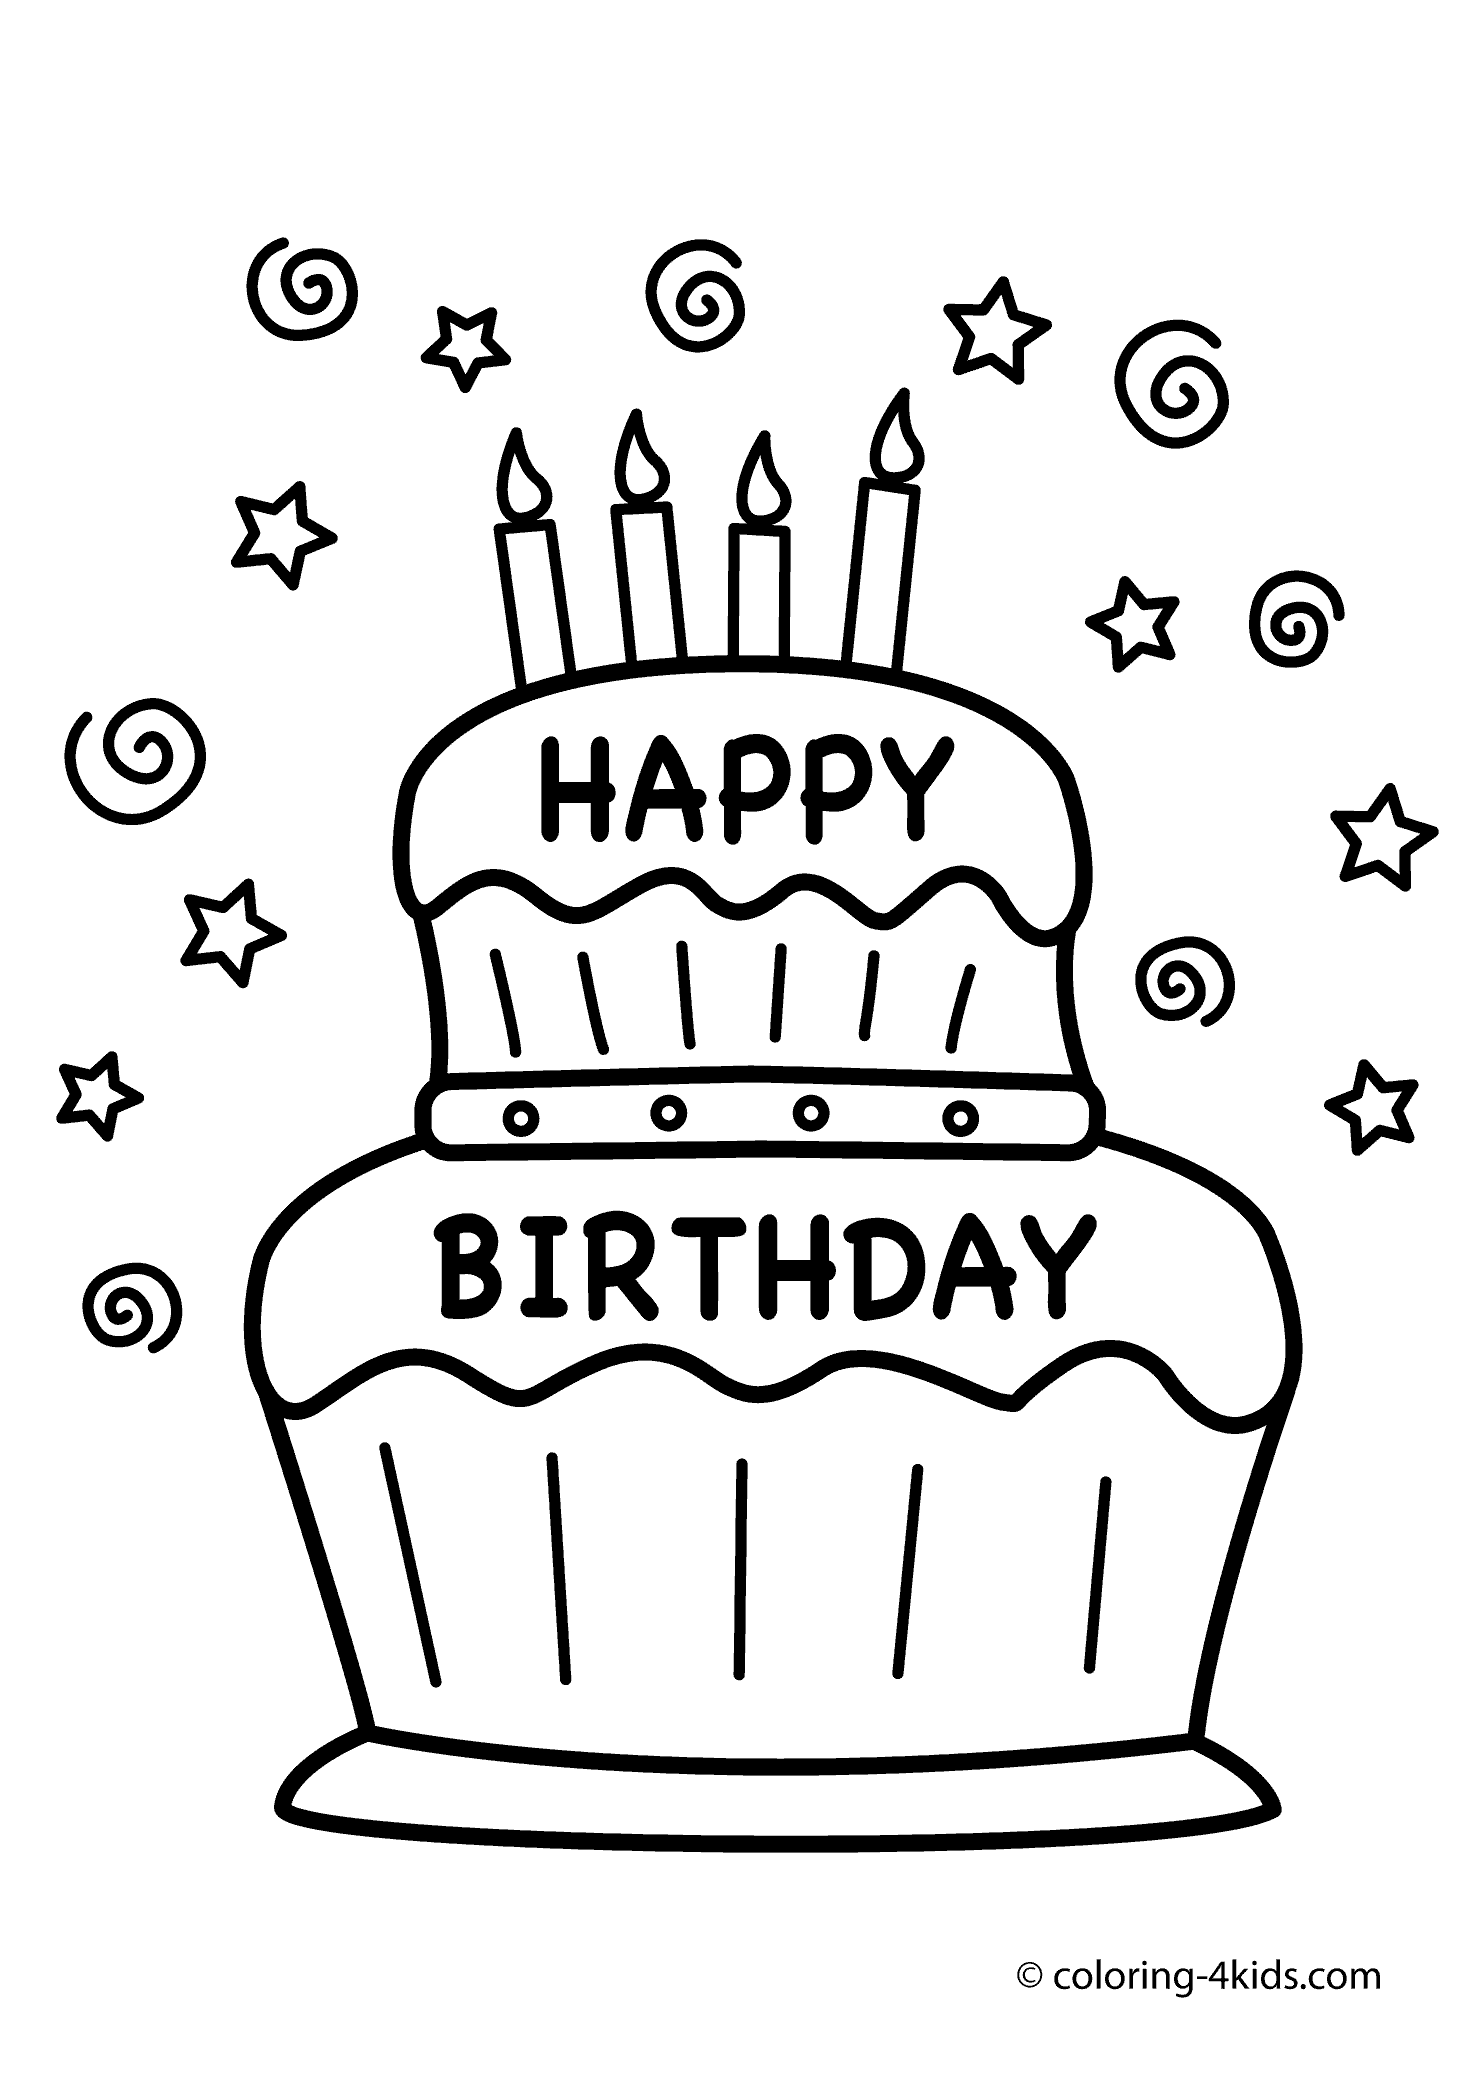 Free Coloring Pages Of Birthday Cakes - High Quality Coloring Pages